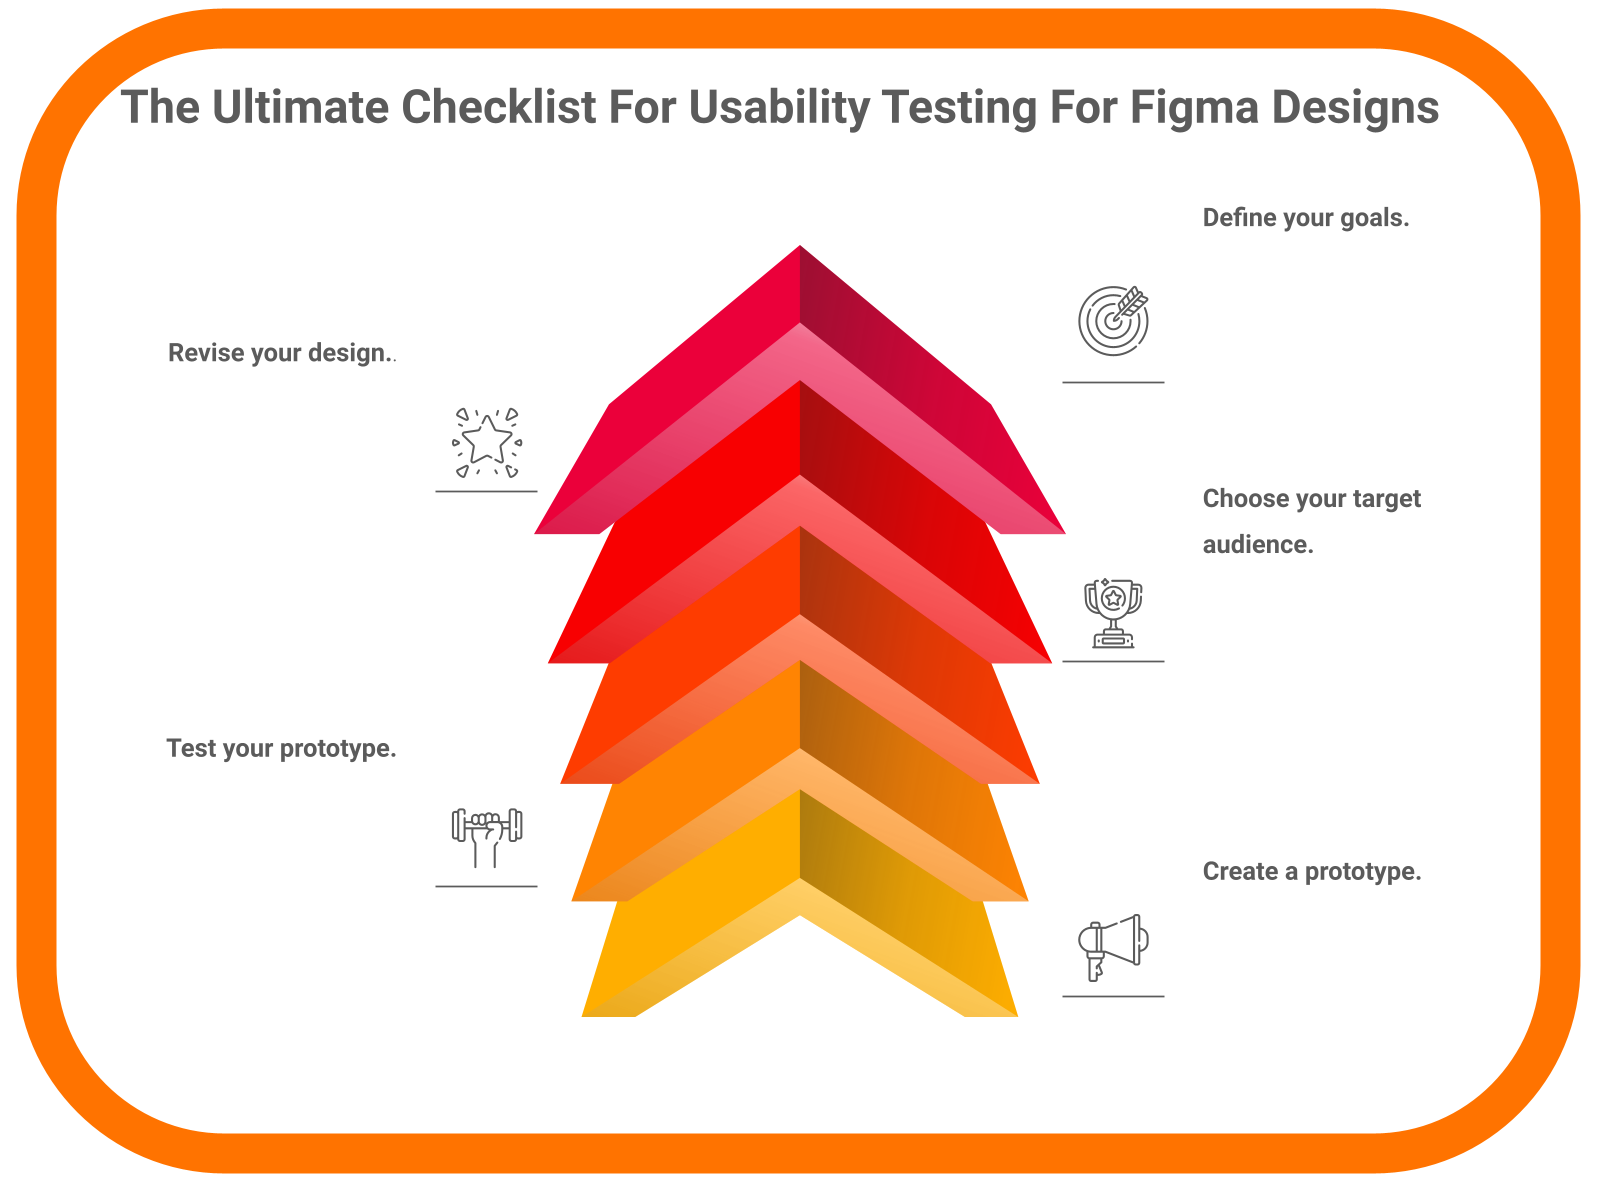 The Ultimate Checklist For Usability Testing For Figma Designs